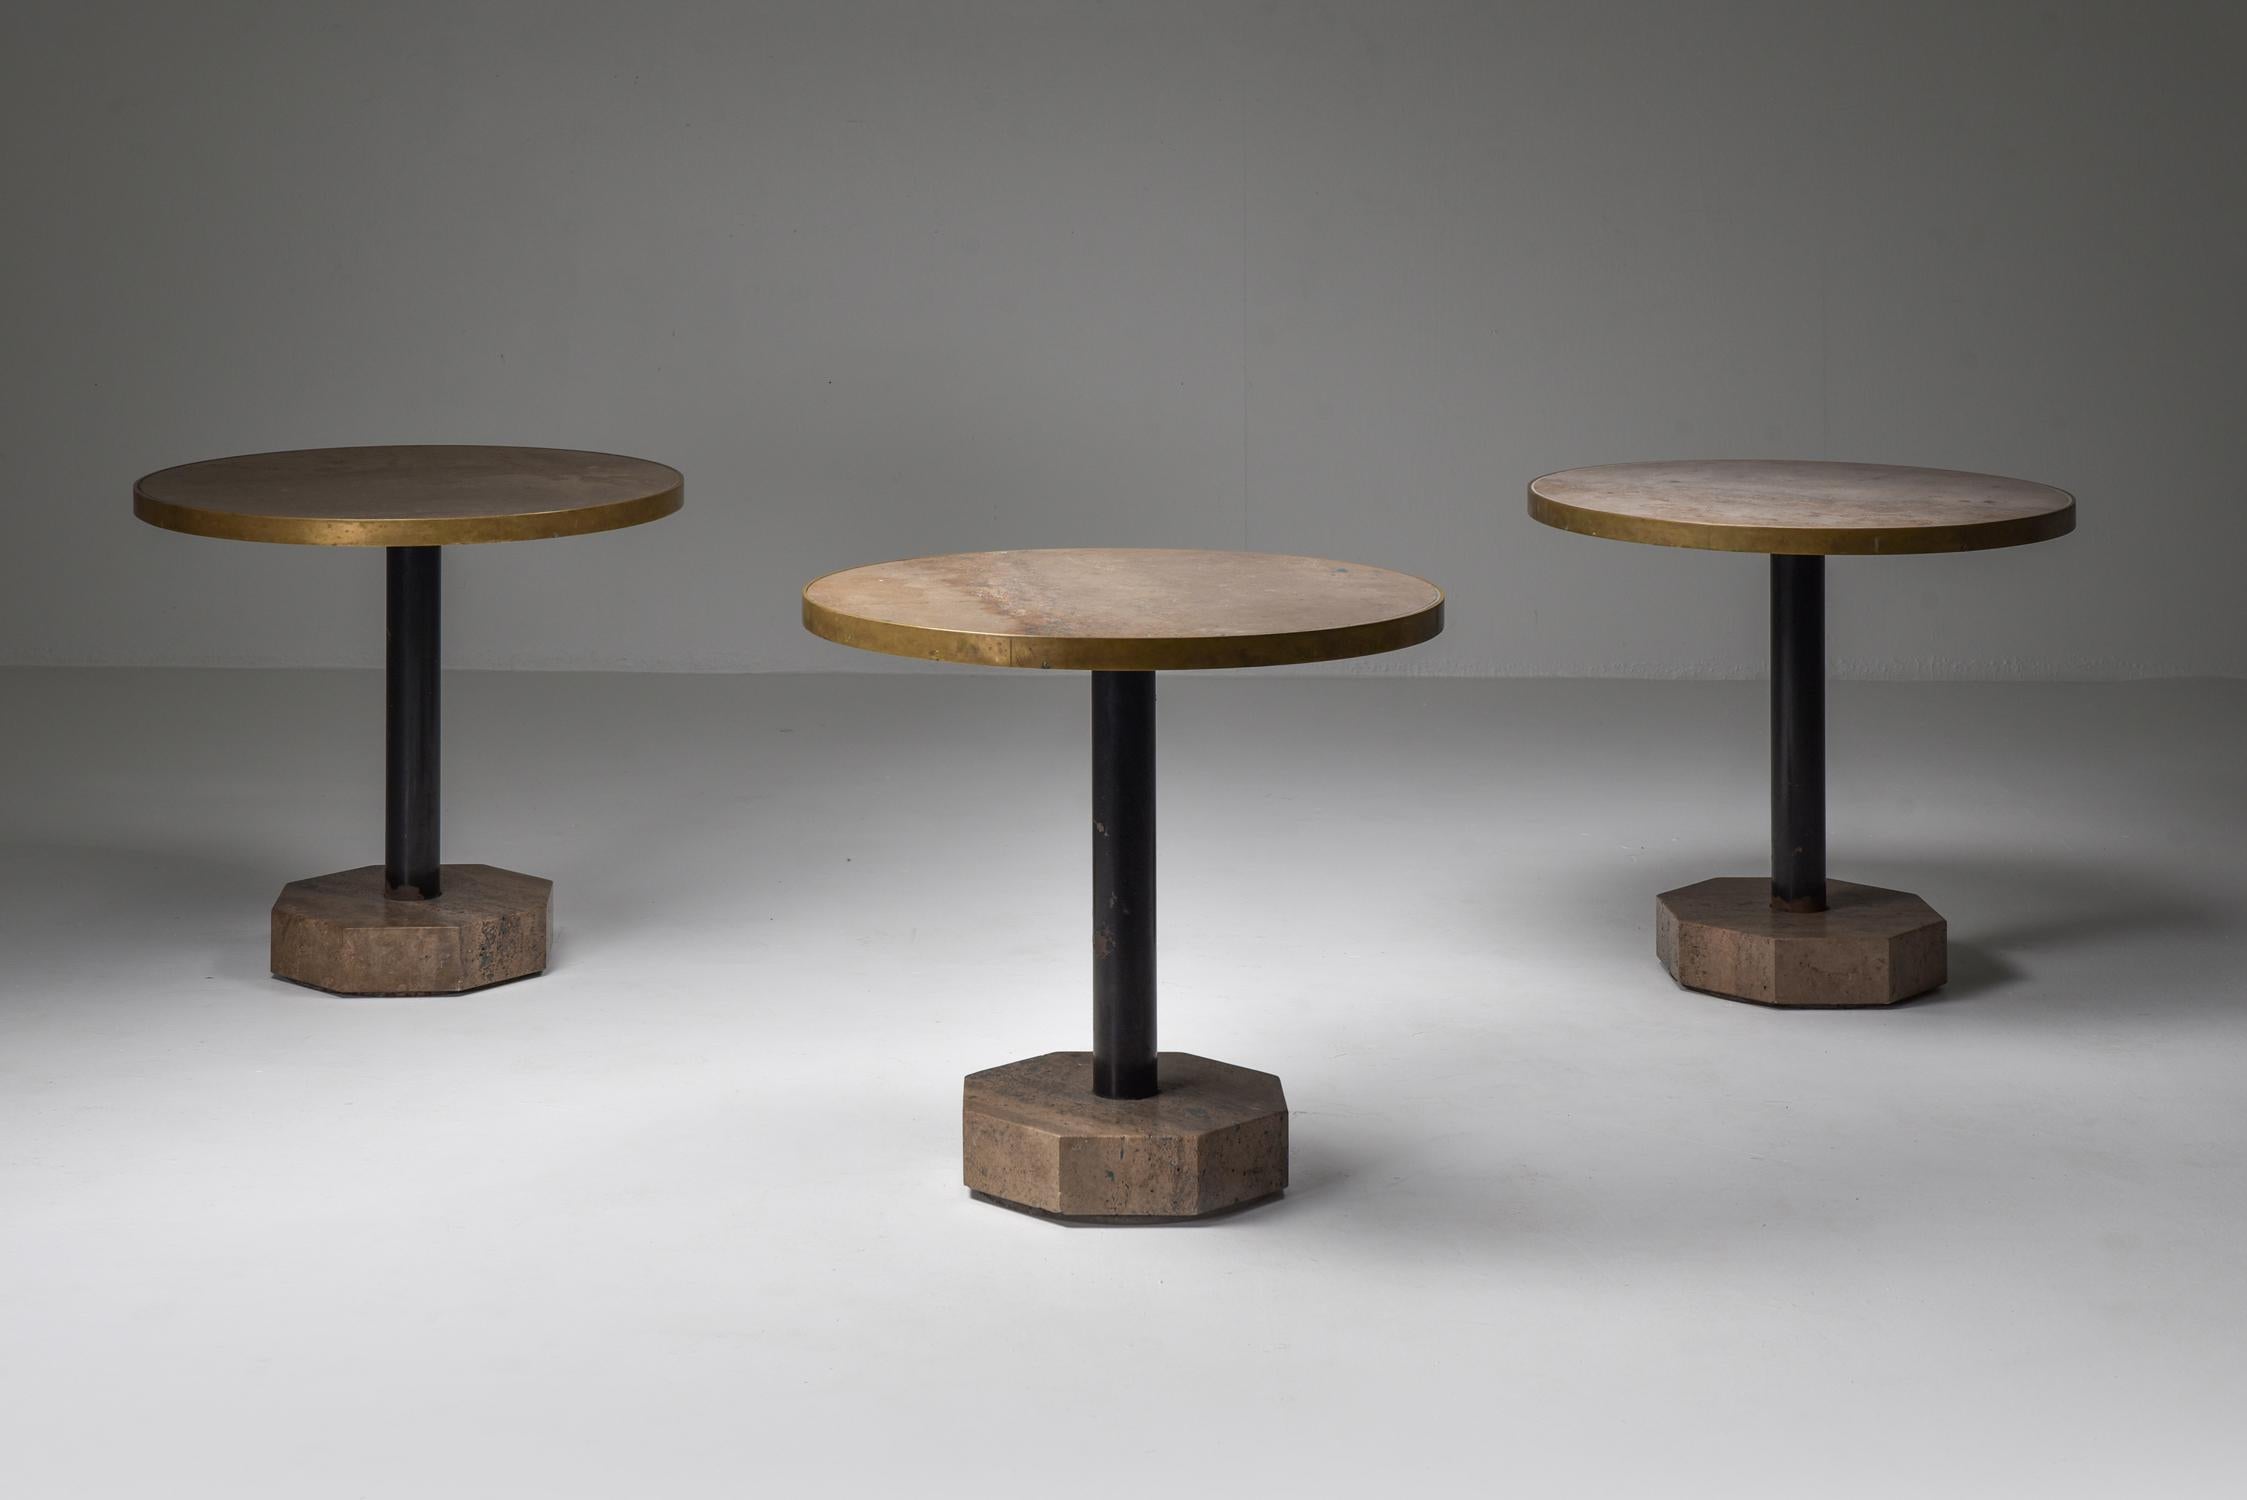 Travertine, brass, steel, bistro or terrace table, Italy 1970s

A solid octagonal block of Iranian travertine forms the base of these chic bistrot tables, 
a steel cylinder connects to the round top which is finished with a brass rim

These